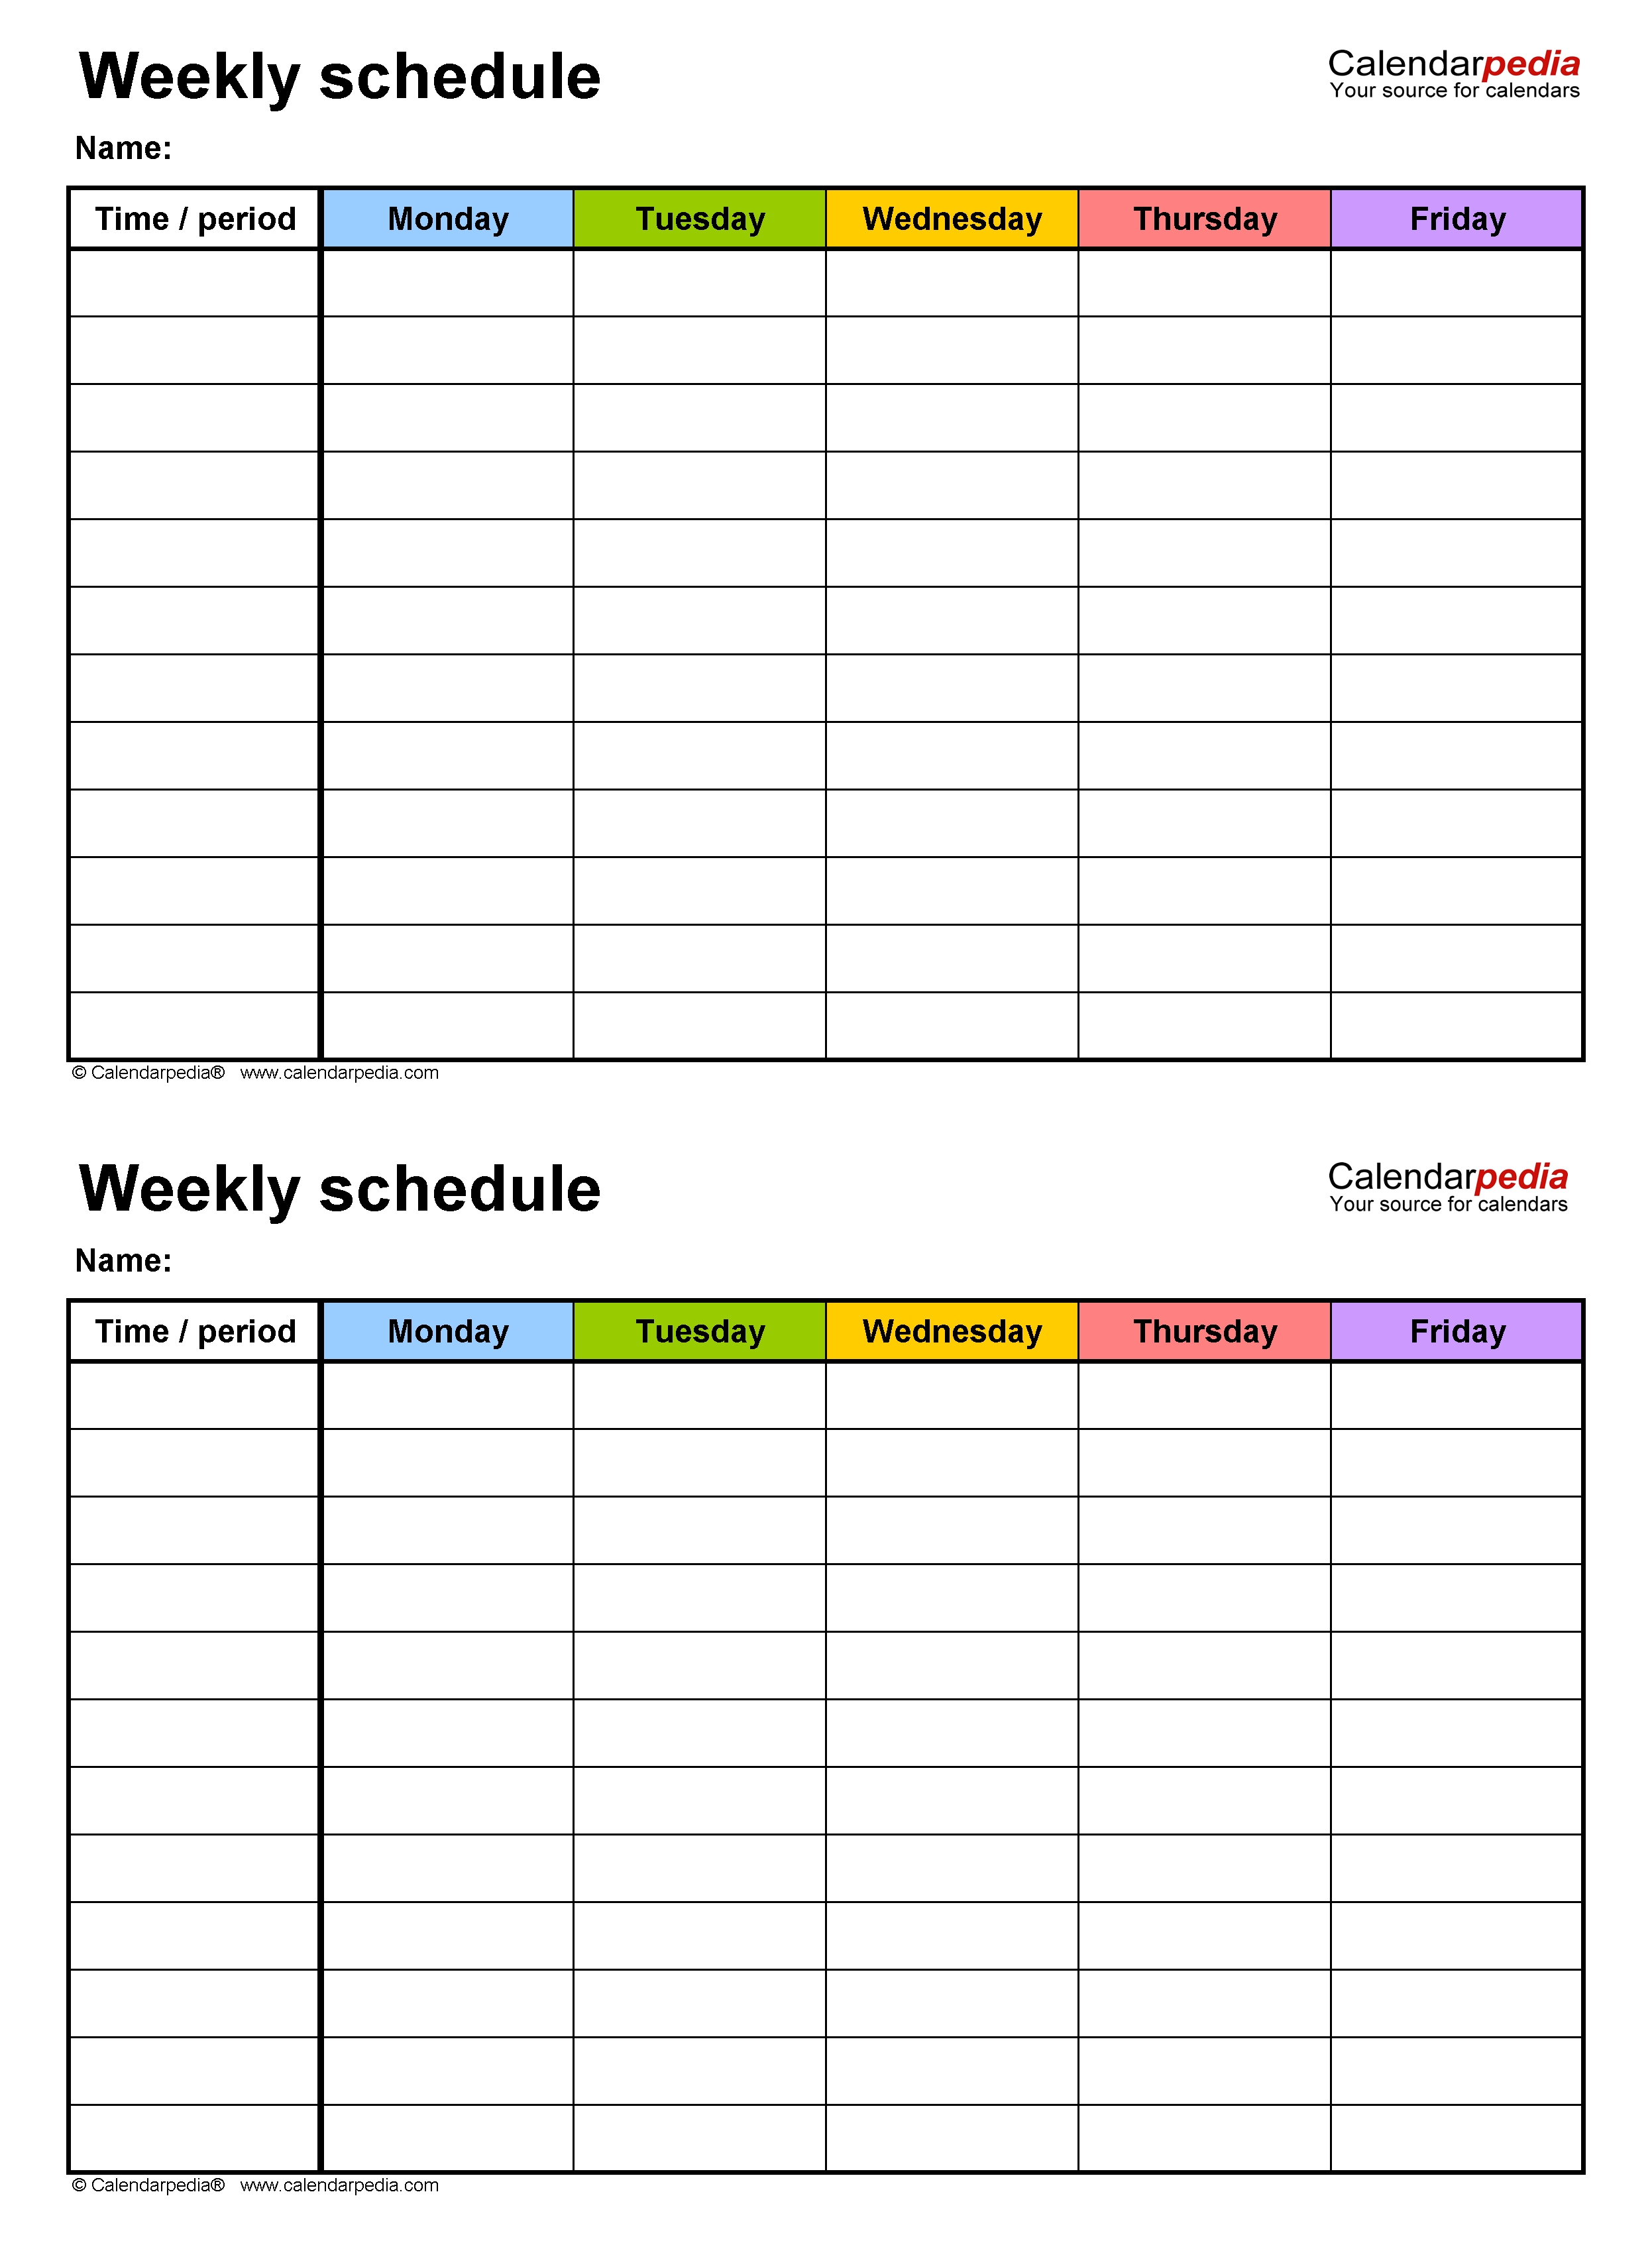 Free Weekly Schedule Templates For Word - 18 Templates